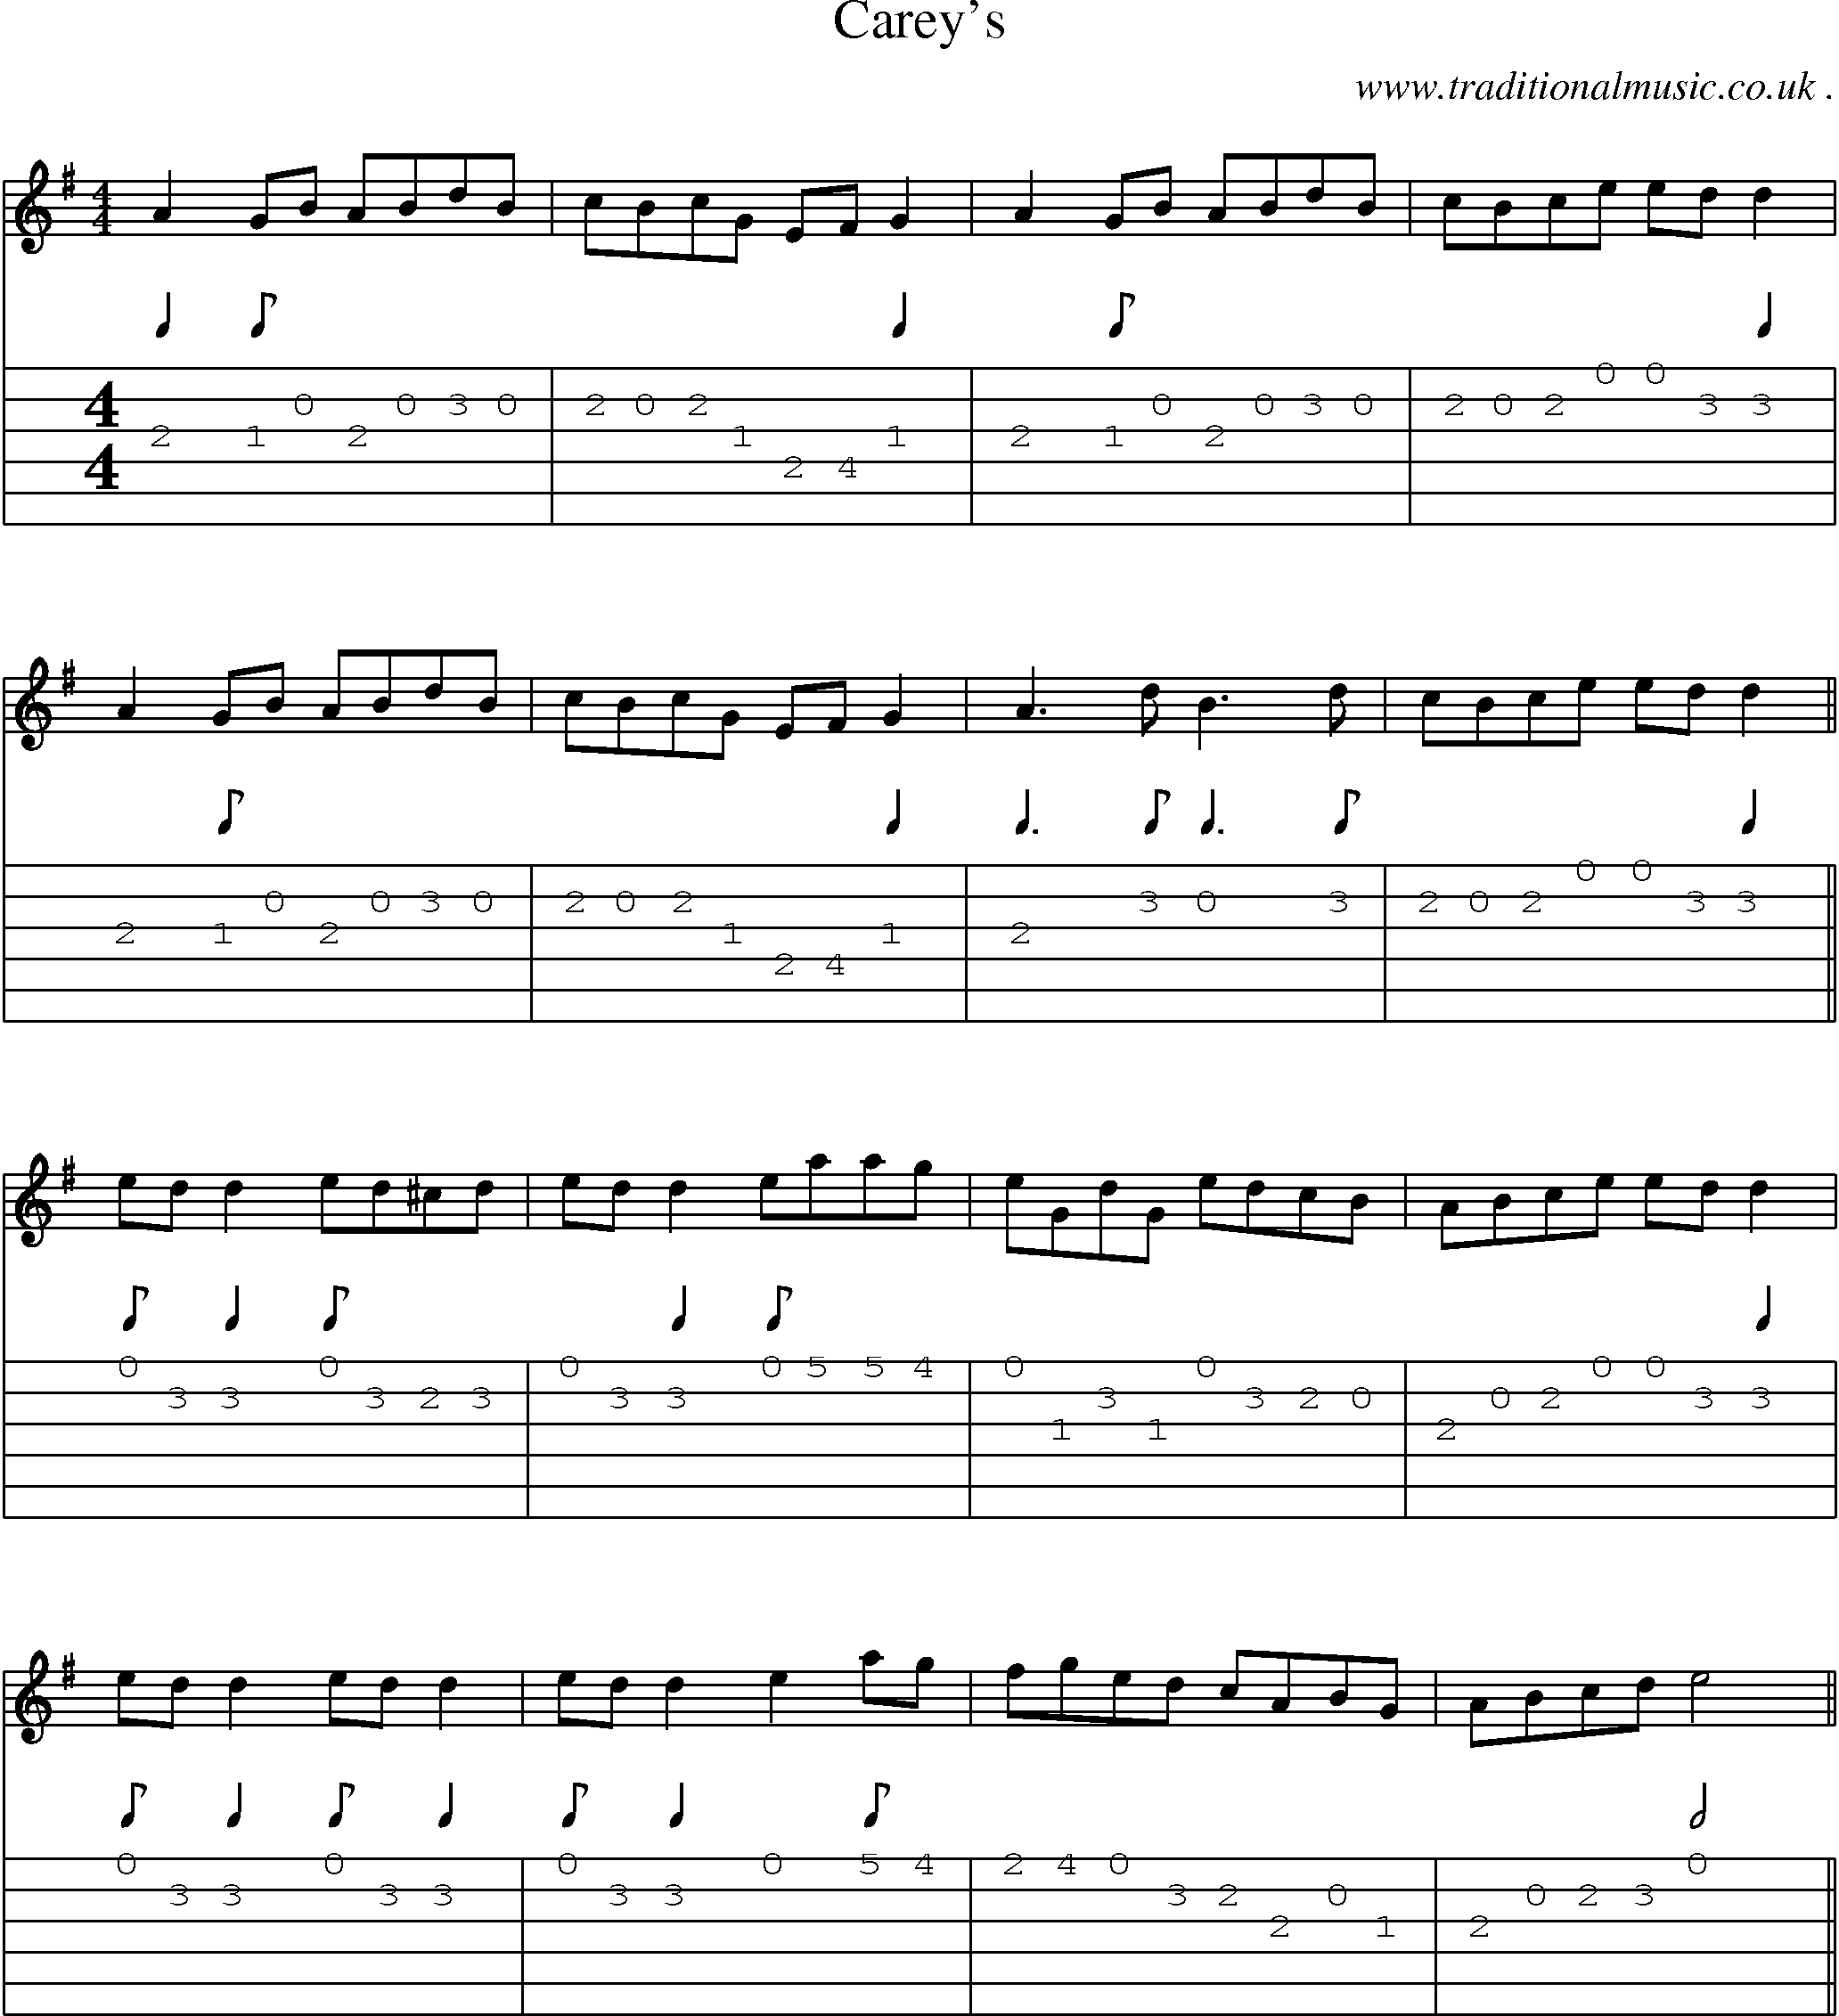 Sheet-Music and Guitar Tabs for Careys